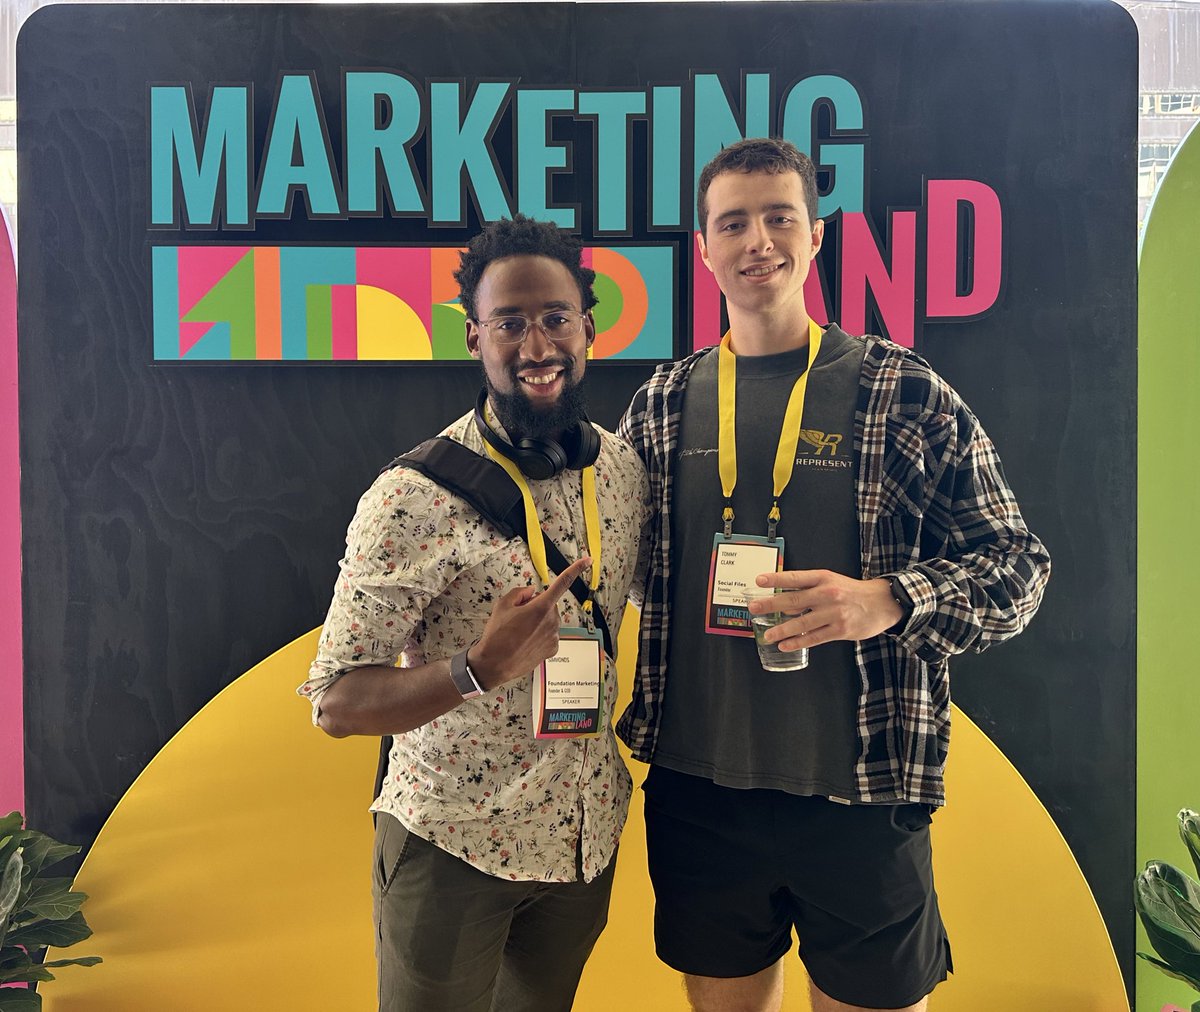 Nothing like going from pixels to flesh! Great to meet @TraceWall & @tclarkmedia at @workweekinc & @mktgmillennials’s Marketing land. 🔥 Awesome event.